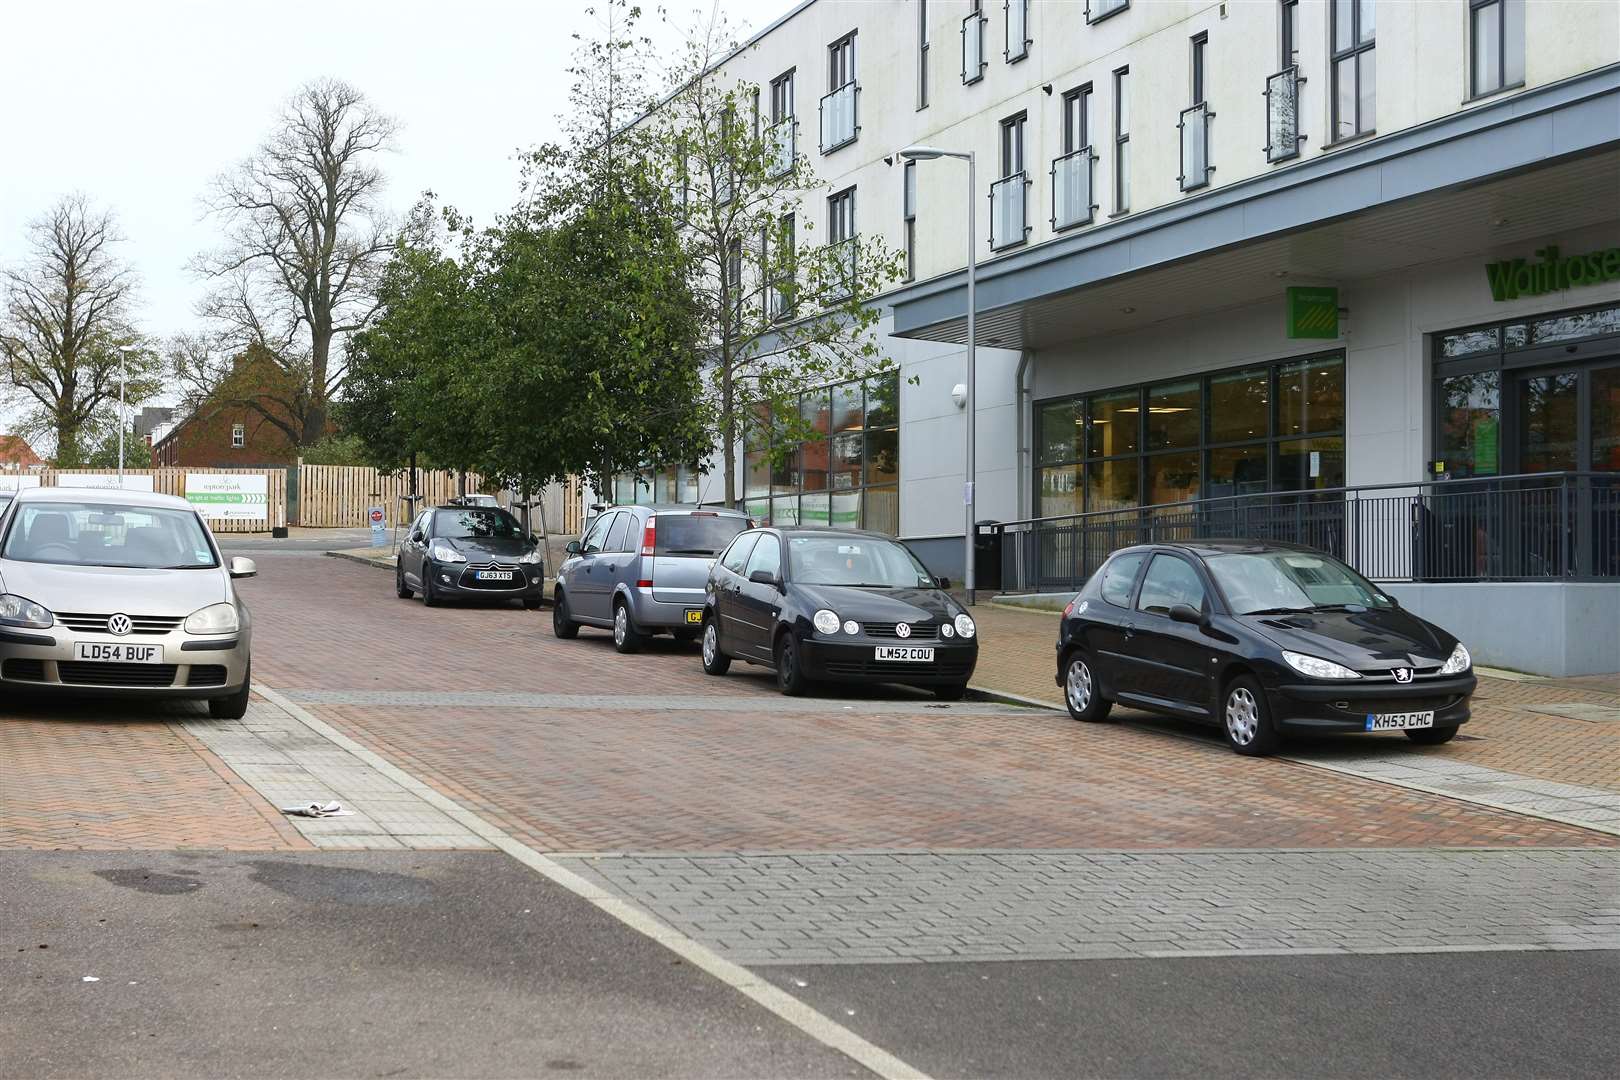 THEN - cars parked either side of the approach road to the Waitrose supermarket car park